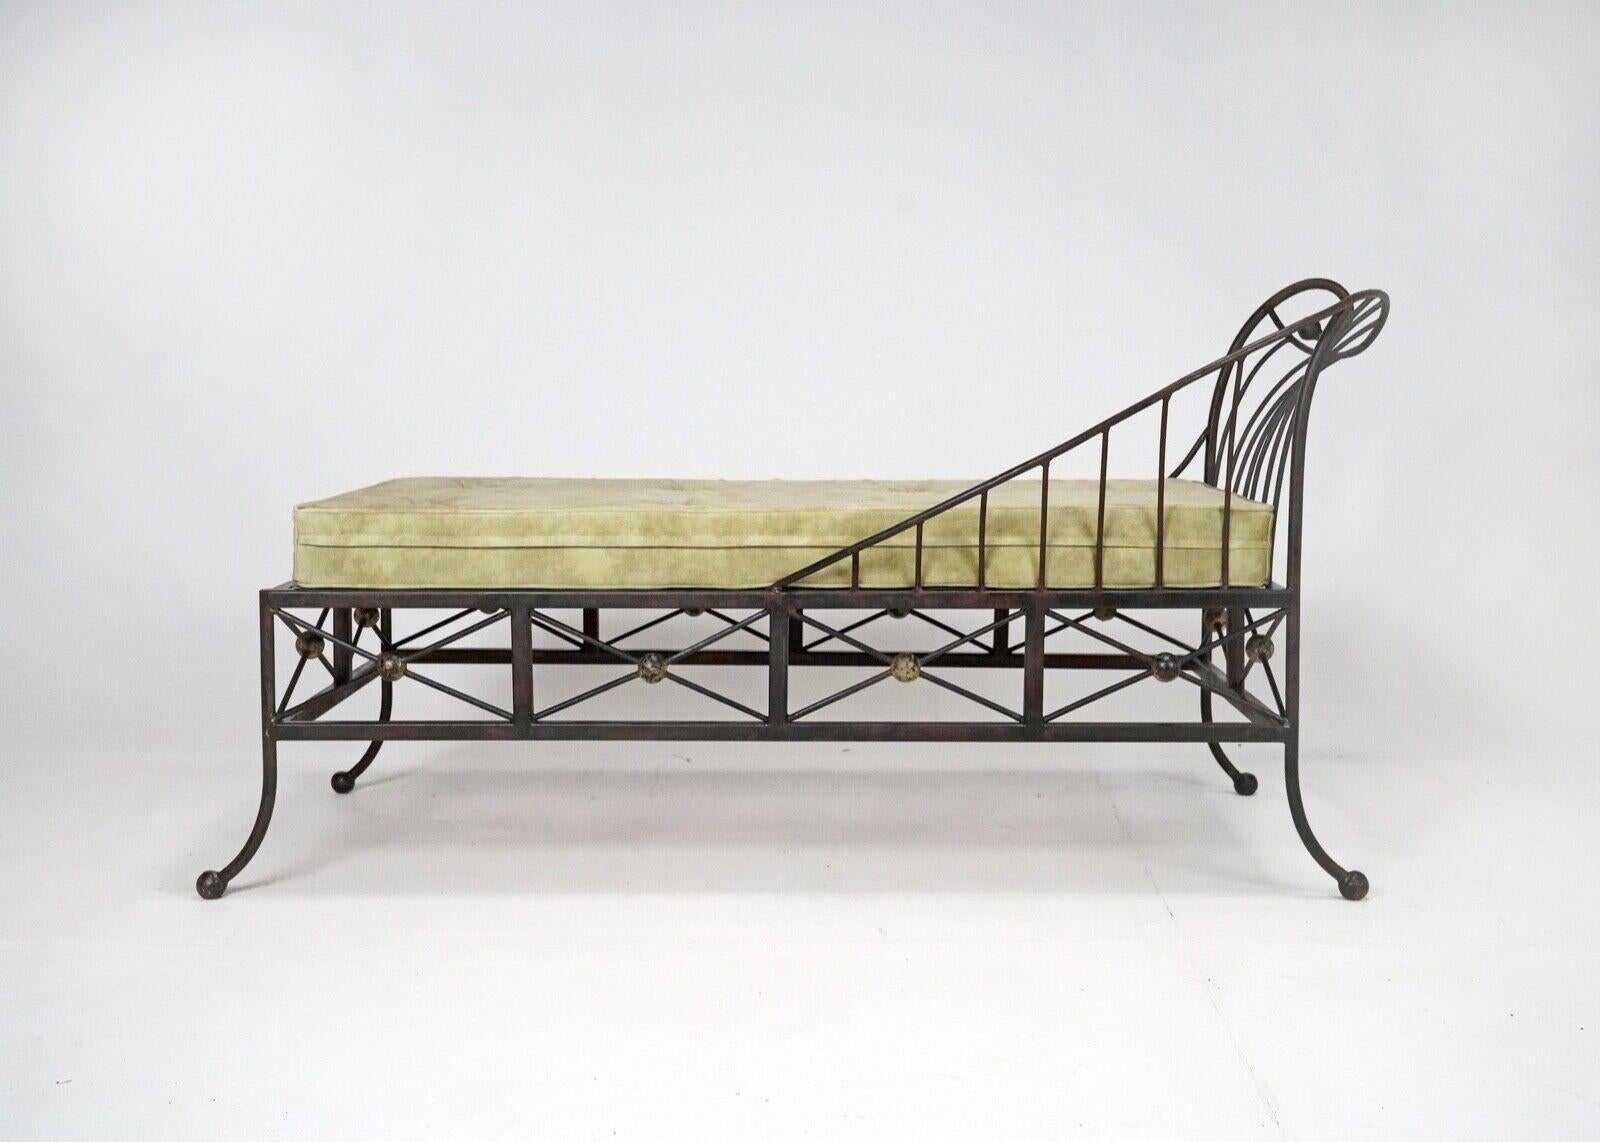 Art Deco Vintage French Box Steel Metal Day Bed, Sun Lounger, Chaise Lounge Green Seat For Sale